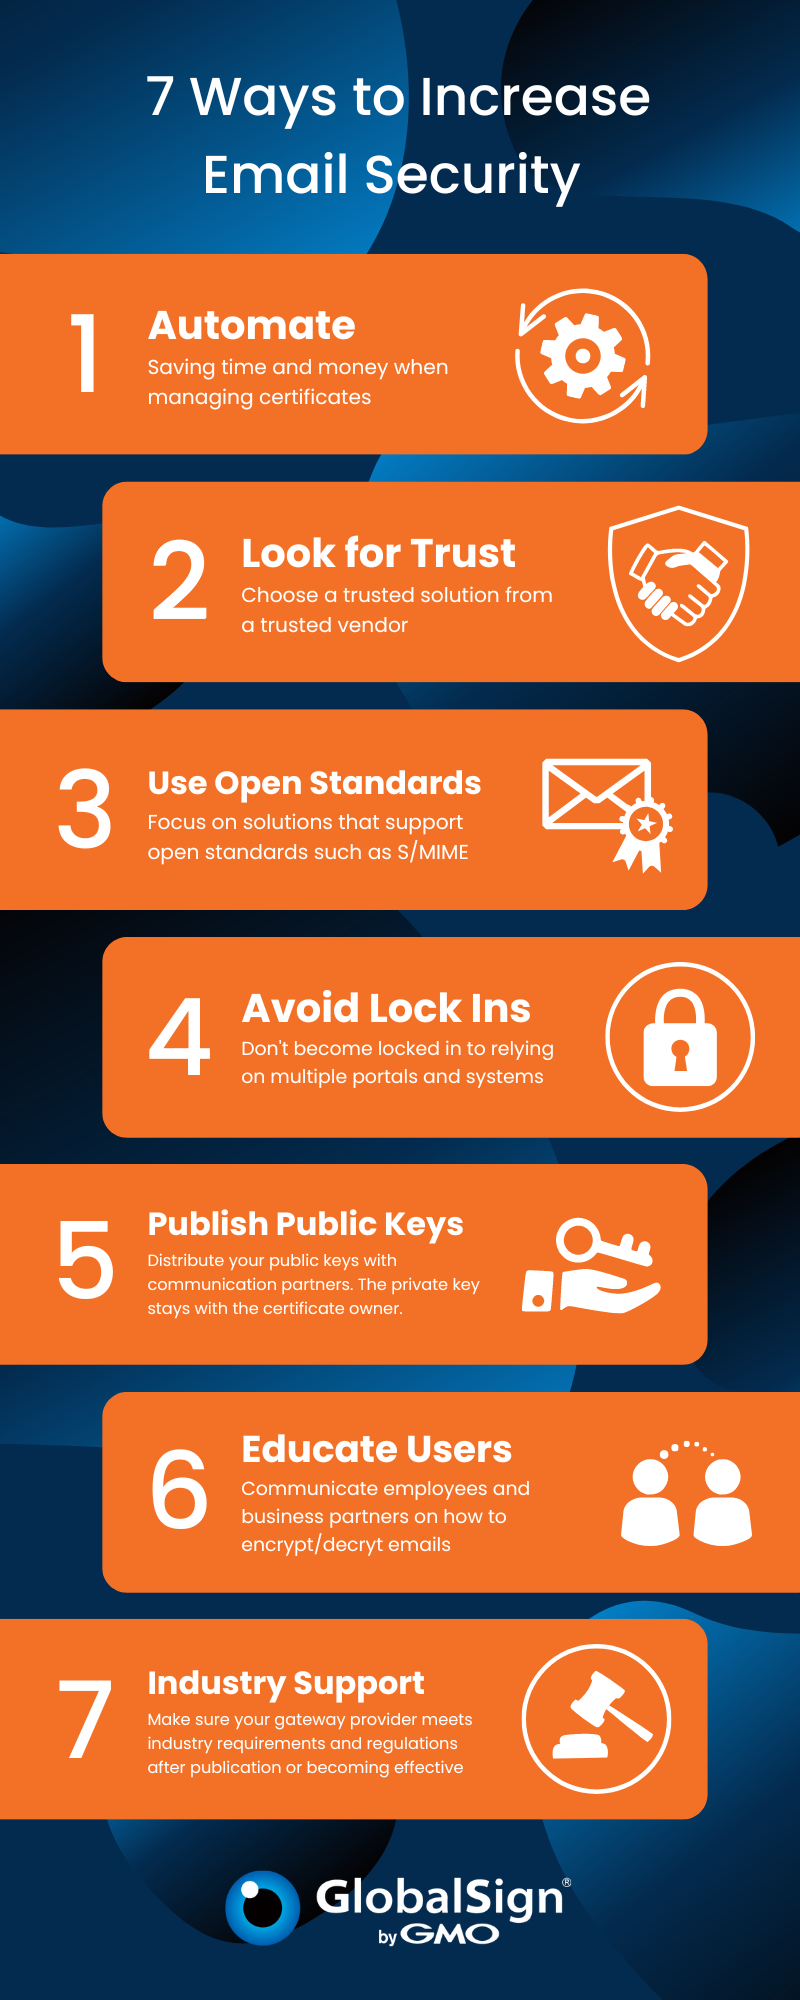 7 Ways to Increase Email Security with Automated Encryption (Infographic) - GlobalSign.png